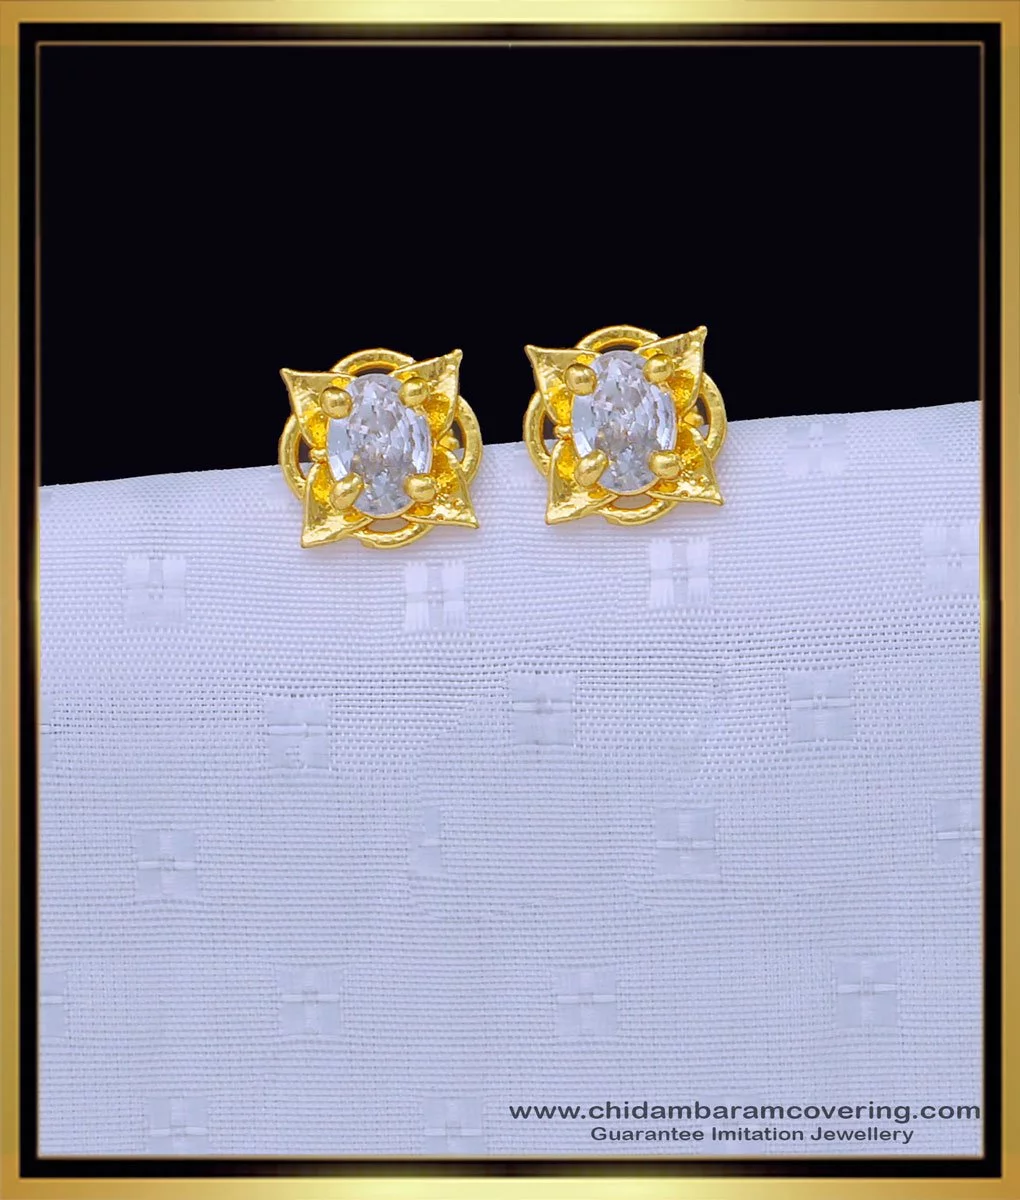 14 KT Yellow Single Stone Stud Earrings With 7.71mm 1.98ctw Cabochon Oval  Glacier Gold Quartz With 7.82mm 2.76 ctw Cabochon Oval Glacier Gold Quartz  – bishopsjewelry